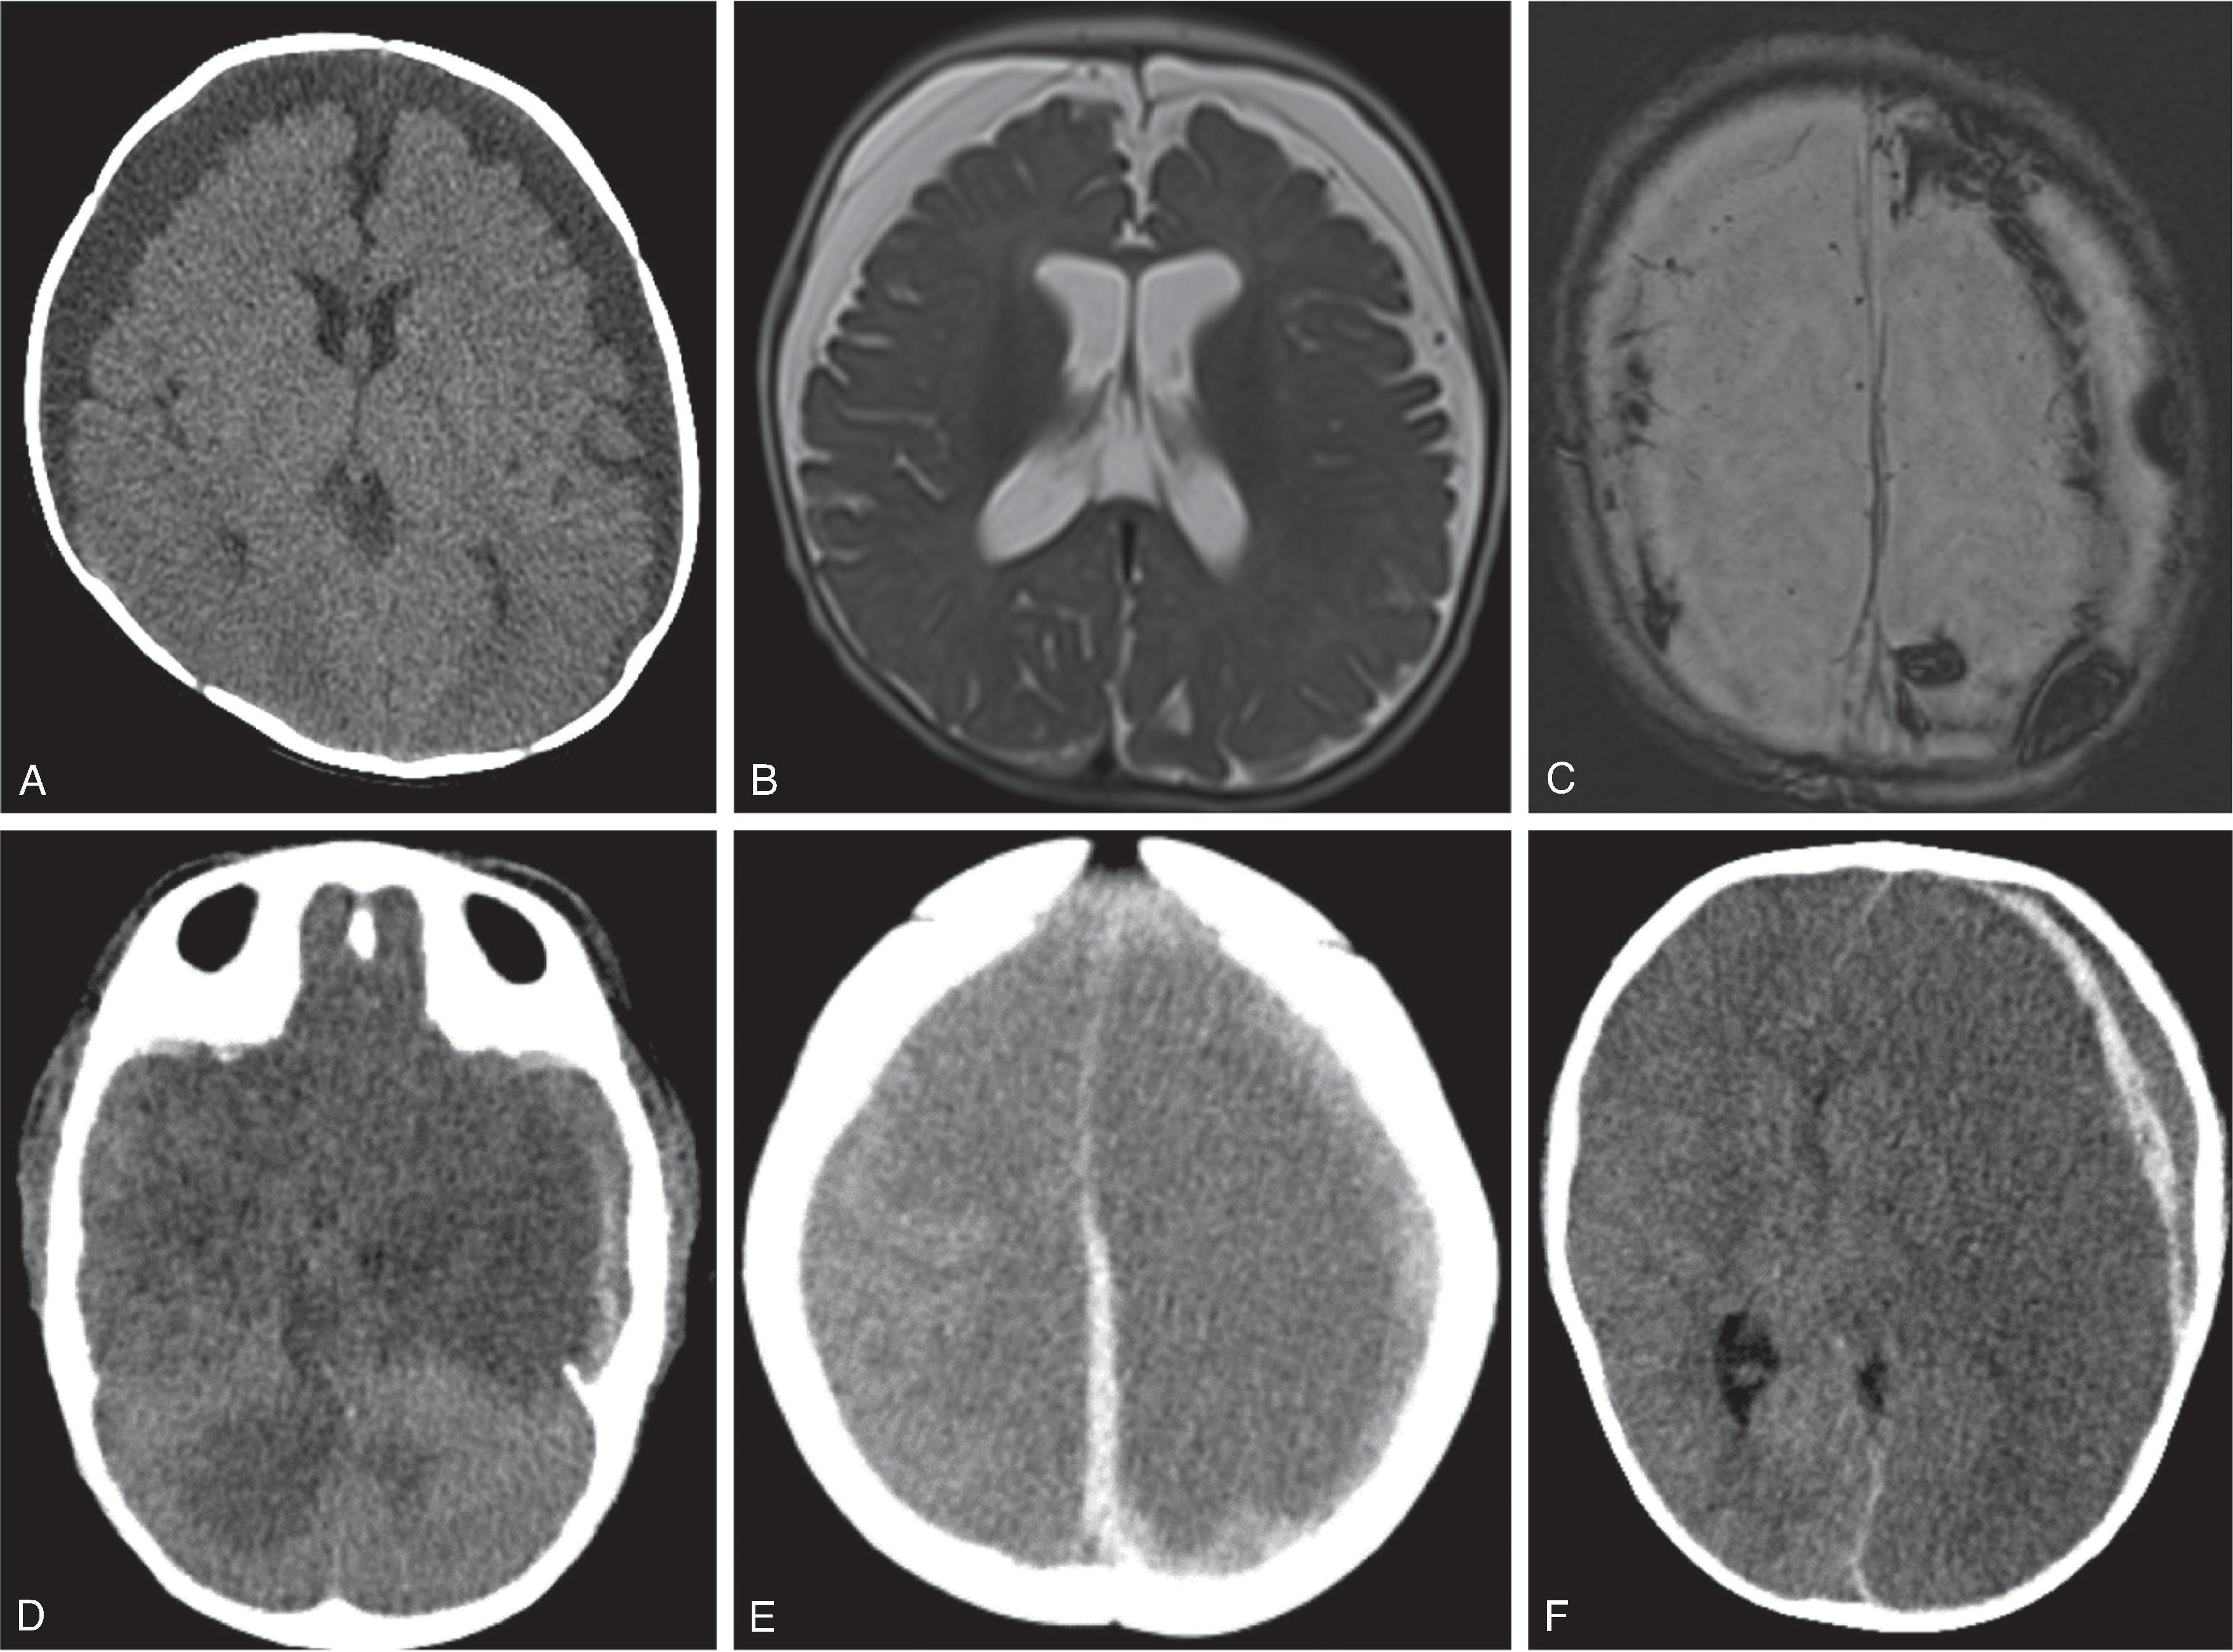 Fig. 10.25, Abusive Head Trauma: Subdural Hemorrhage Patterns . (A) Axial head CT demonstrates bilateral frontoparietal low-density extraaxial spaces. No vessels traverse these spaces, which should raise concern for subdural fluid collections. (B) Axial T2W images demonstrate bilateral frontal subdural fluid collections with septations. (C) Axial SWI image shows susceptibility from hemorrhage in the bilateral subdural spaces. (D and E) Axial head CT demonstrating hyperdense subdural hemorrhage along the falx and left cerebral hemisphere in addition to large regions of parenchymal ischemia. (F) Axial head CT demonstrating a mixed density subdural hematoma along the lateral left frontal lobe with associated large region of loss of gray and white matter differentiation, midline to the right, and subfalcine herniation of the frontal lobe.